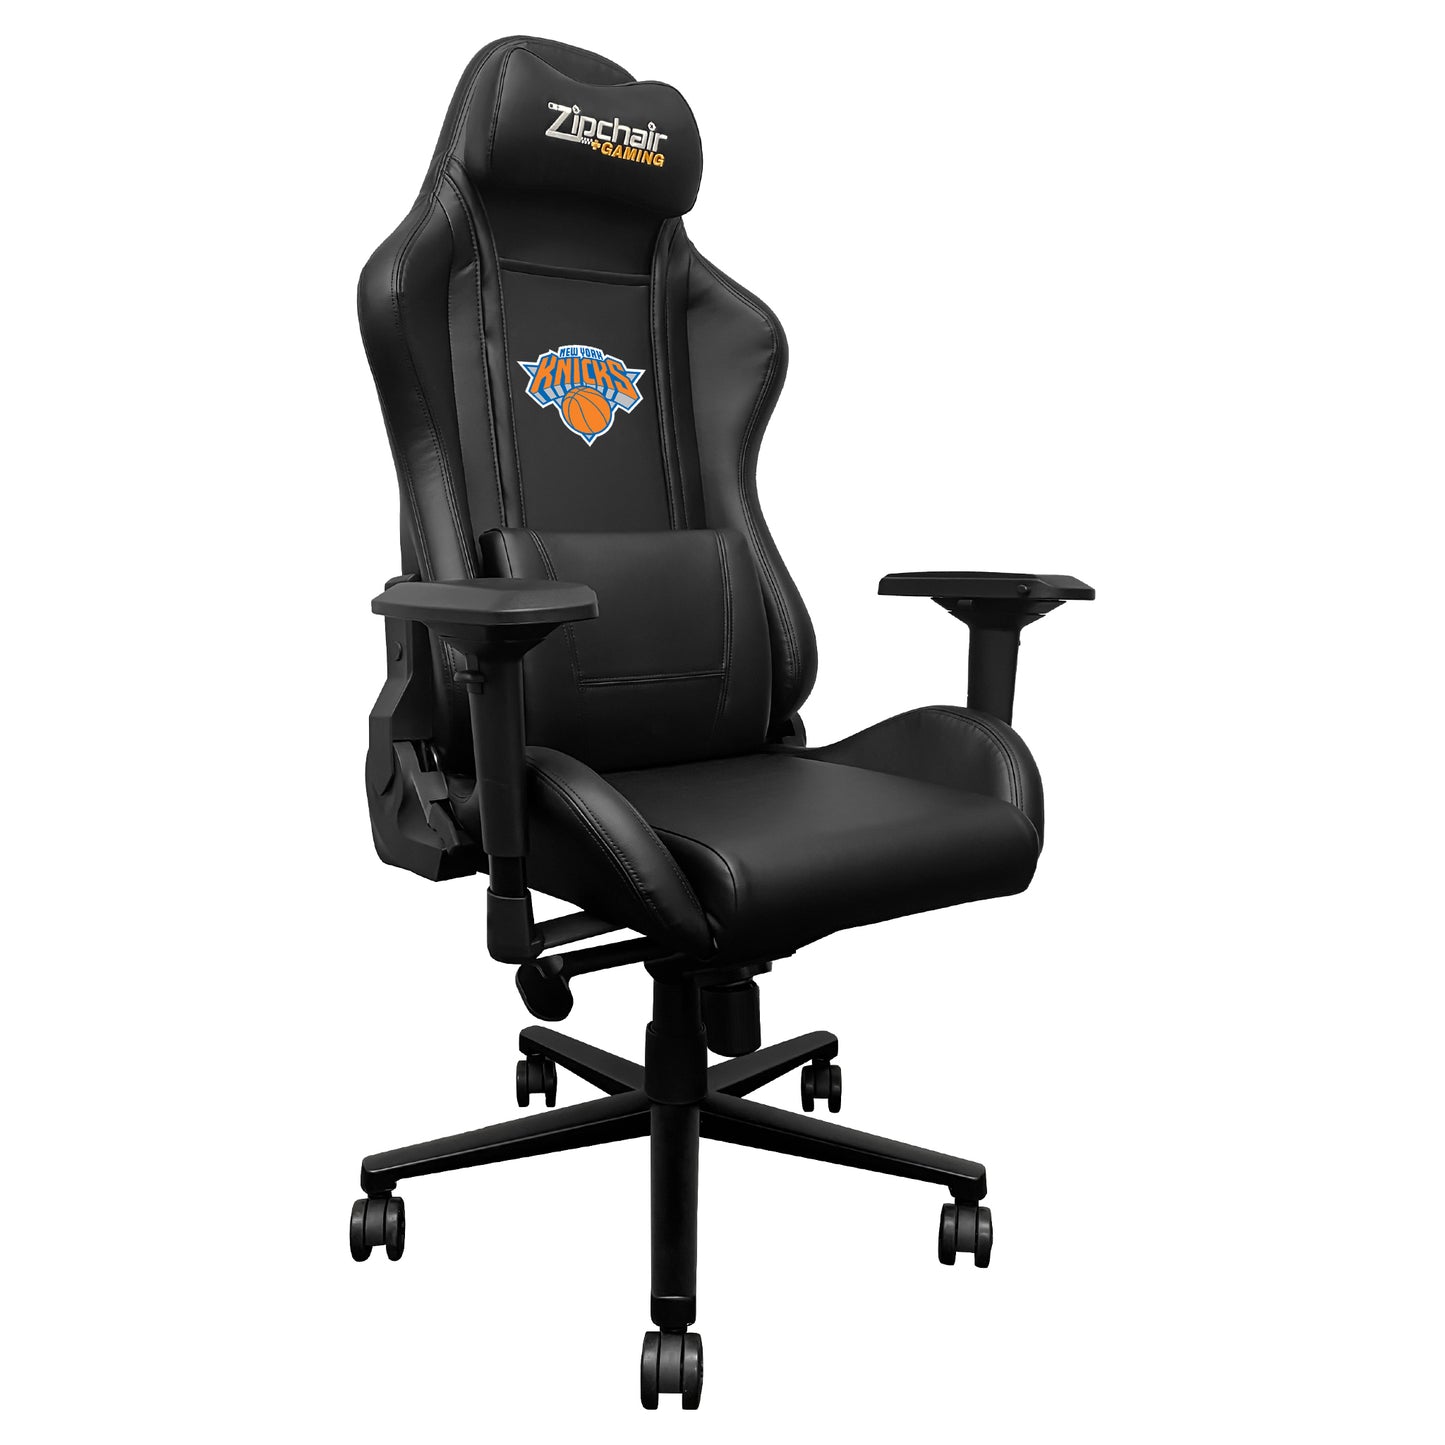 Xpression Pro Gaming Chair with New York Knicks Logo